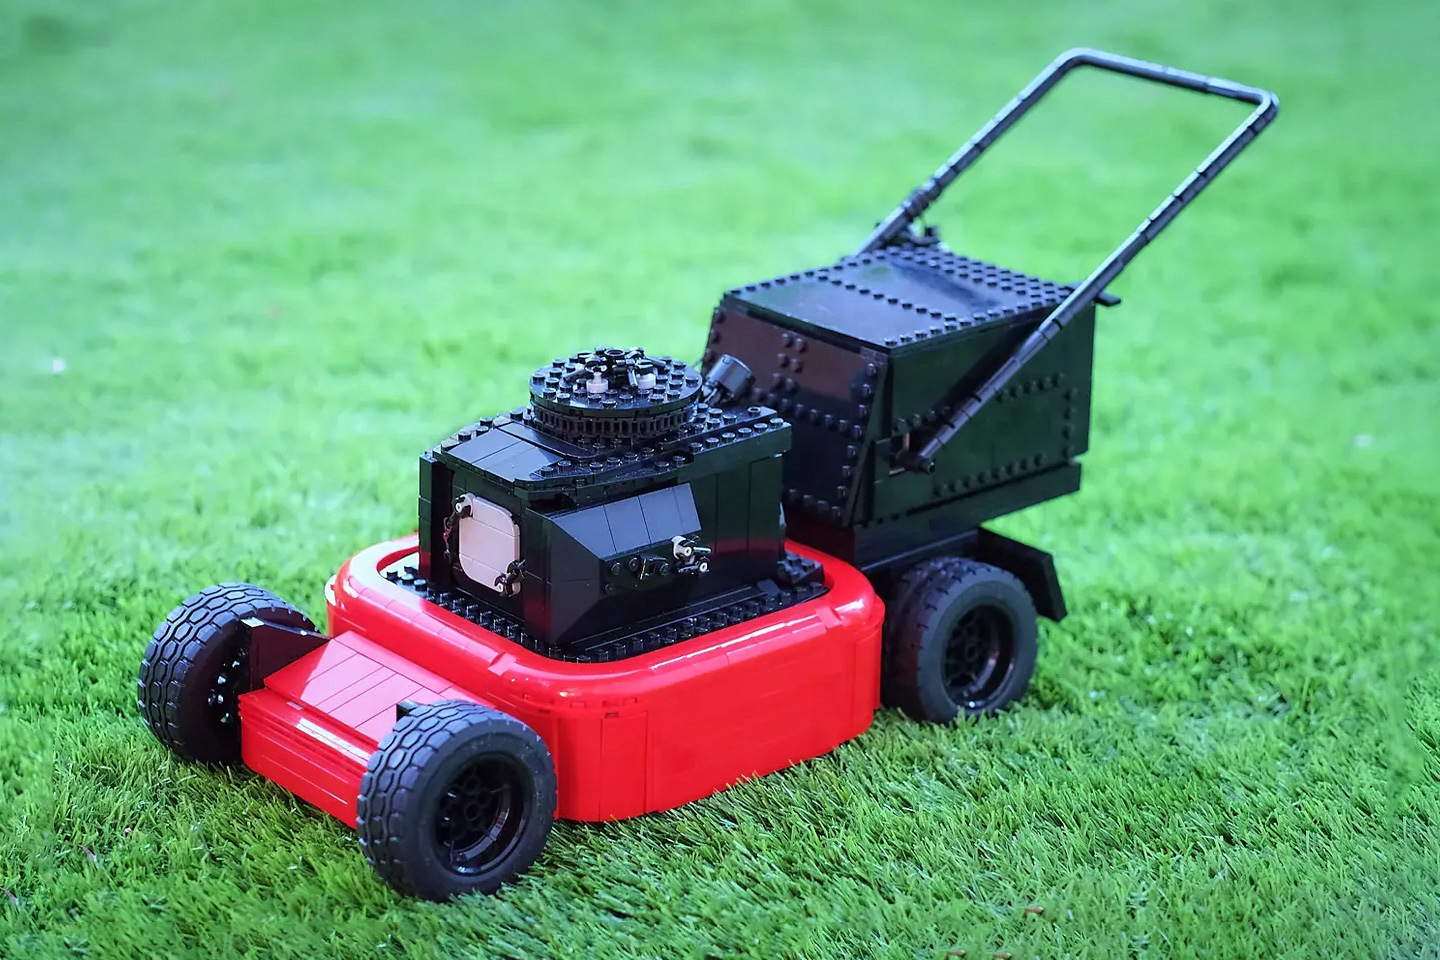 #Someone built a LEGO lawnmower that (sort of) works?!